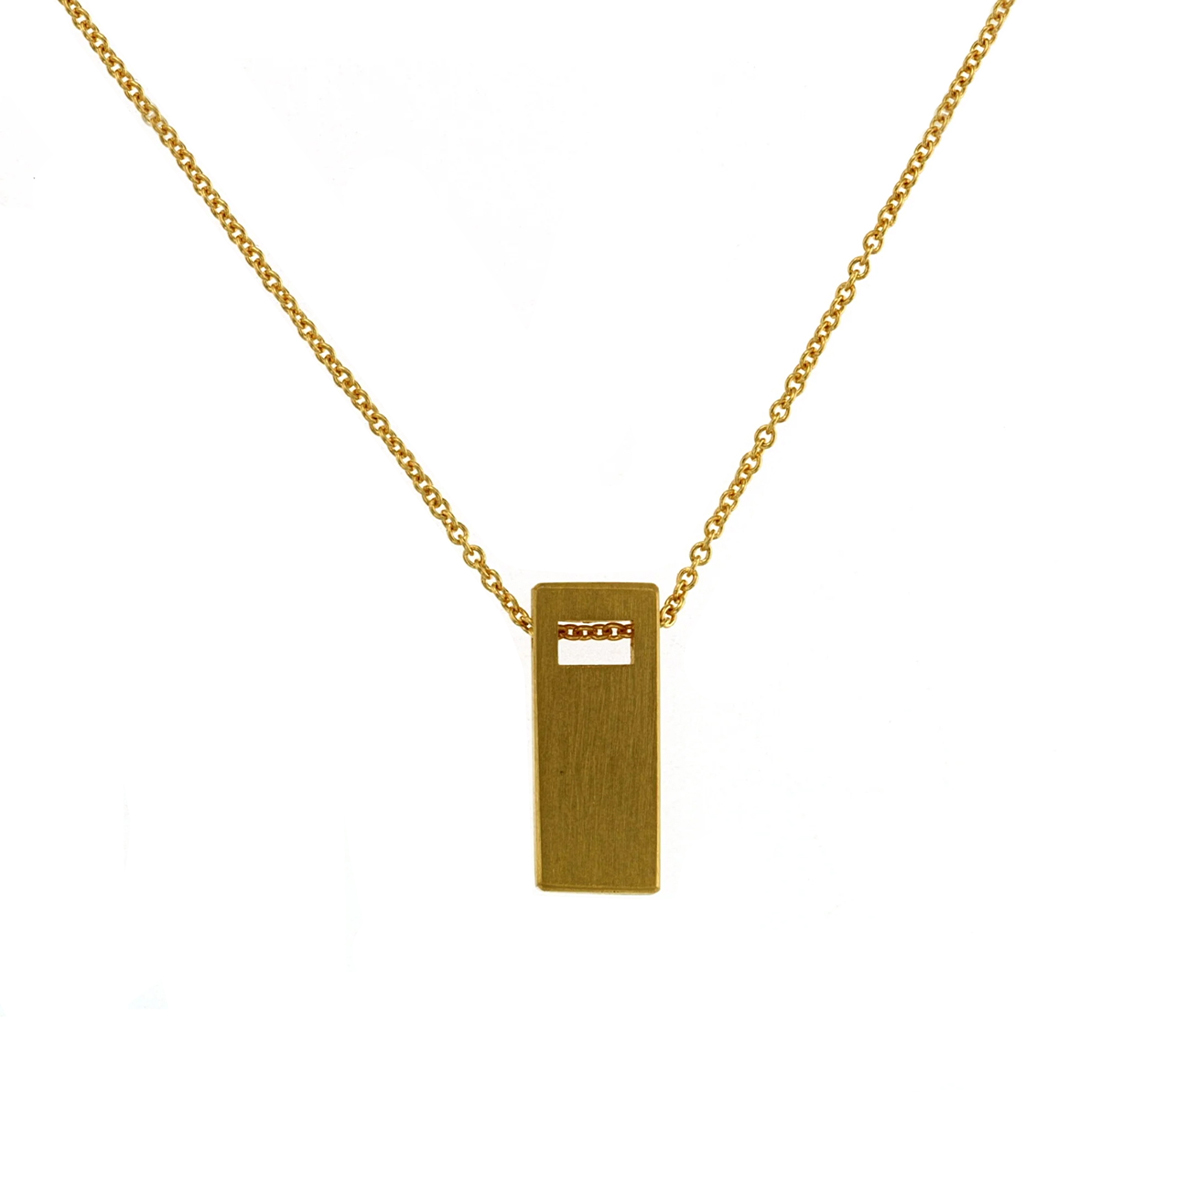 Gold Plated Sterling Silver Rectangular Cutout Pendant with Chain